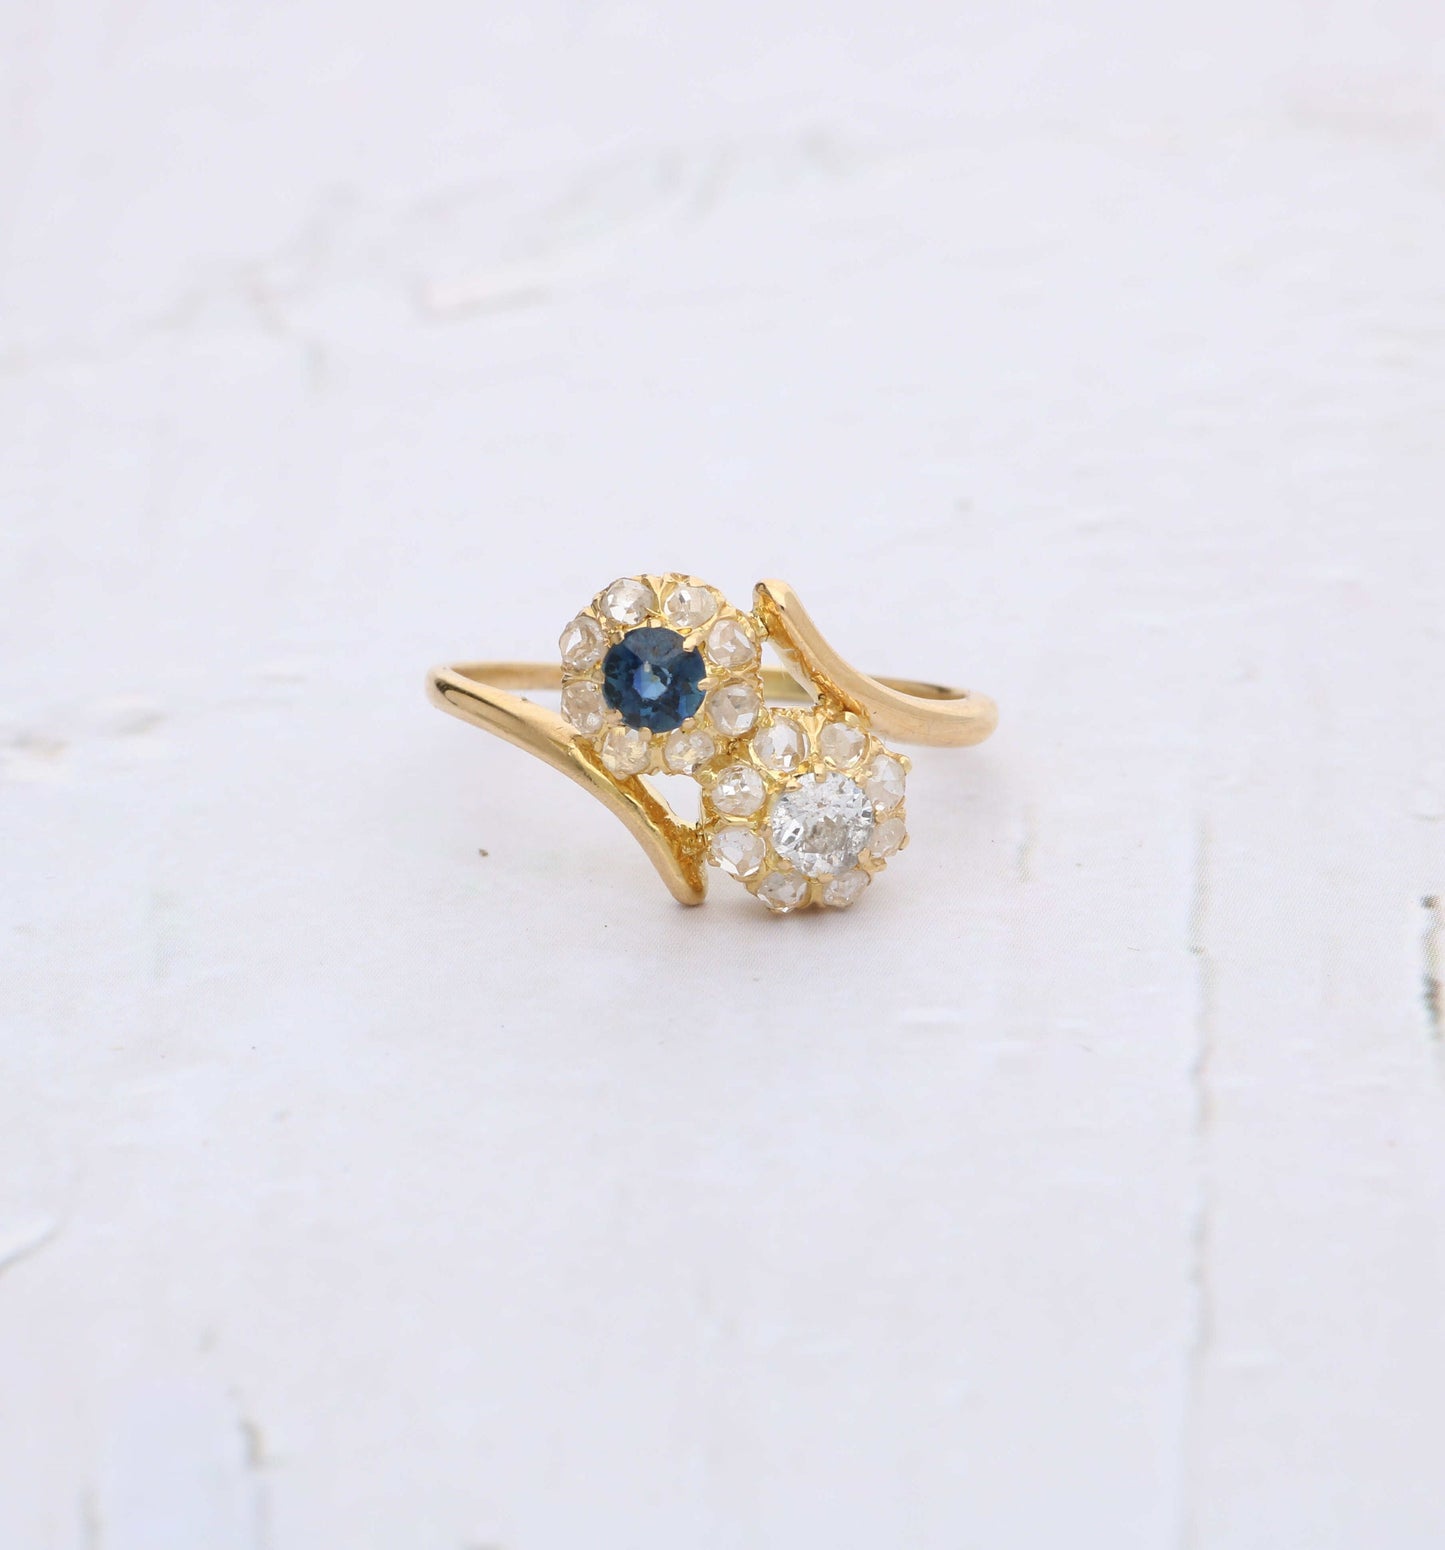 Antique 15ct diamond and sapphire cluster ring